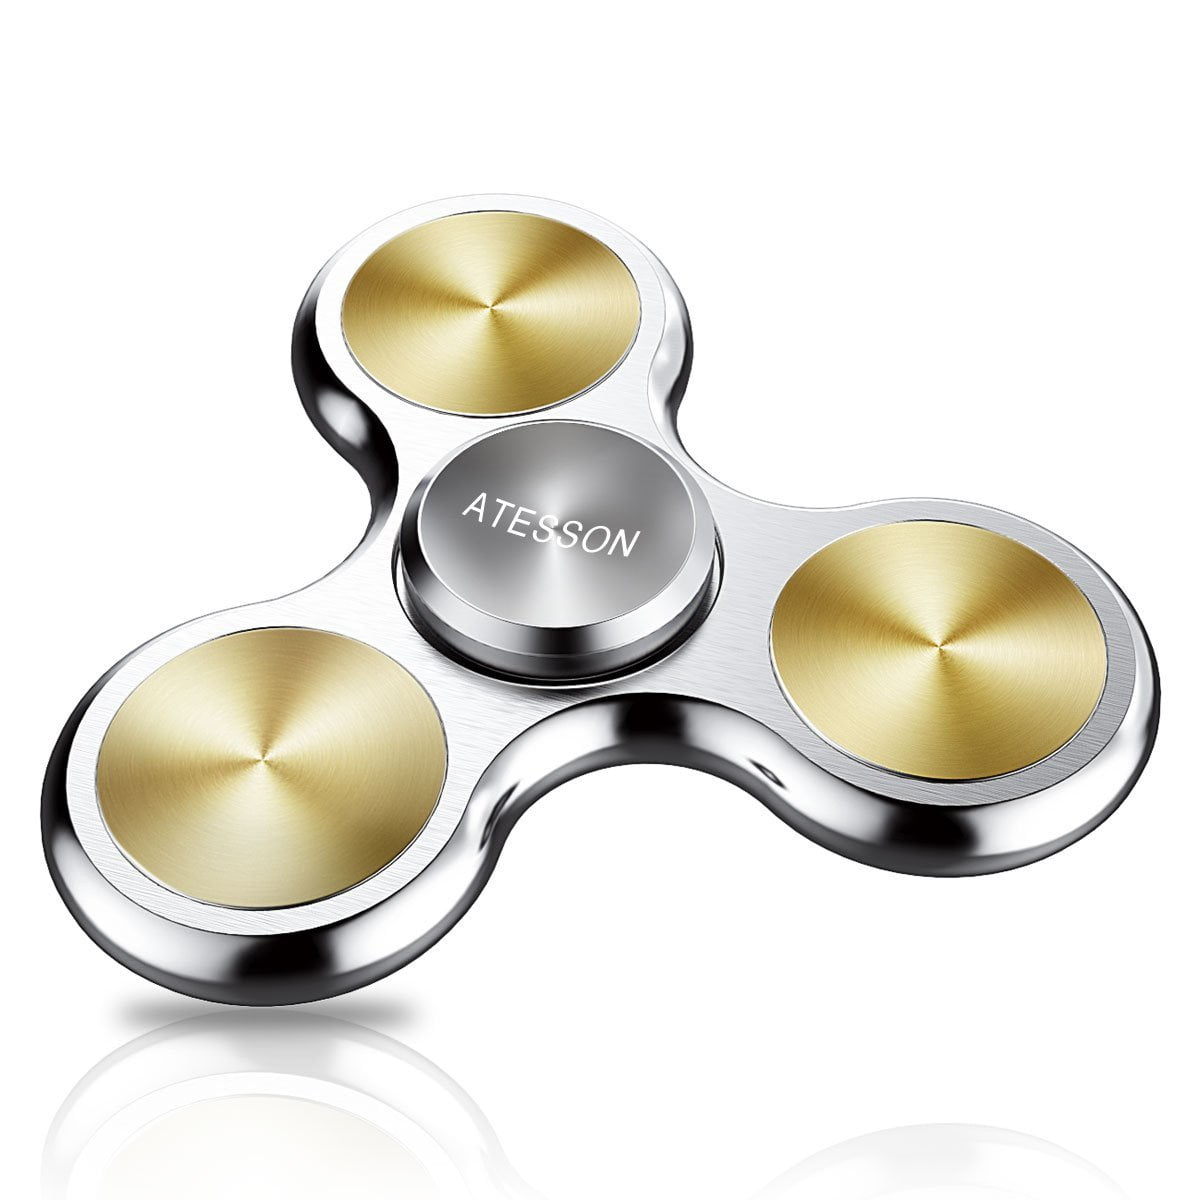 atesson fidget spinner toy 4 to 10 min spins ultra durable stainless steel